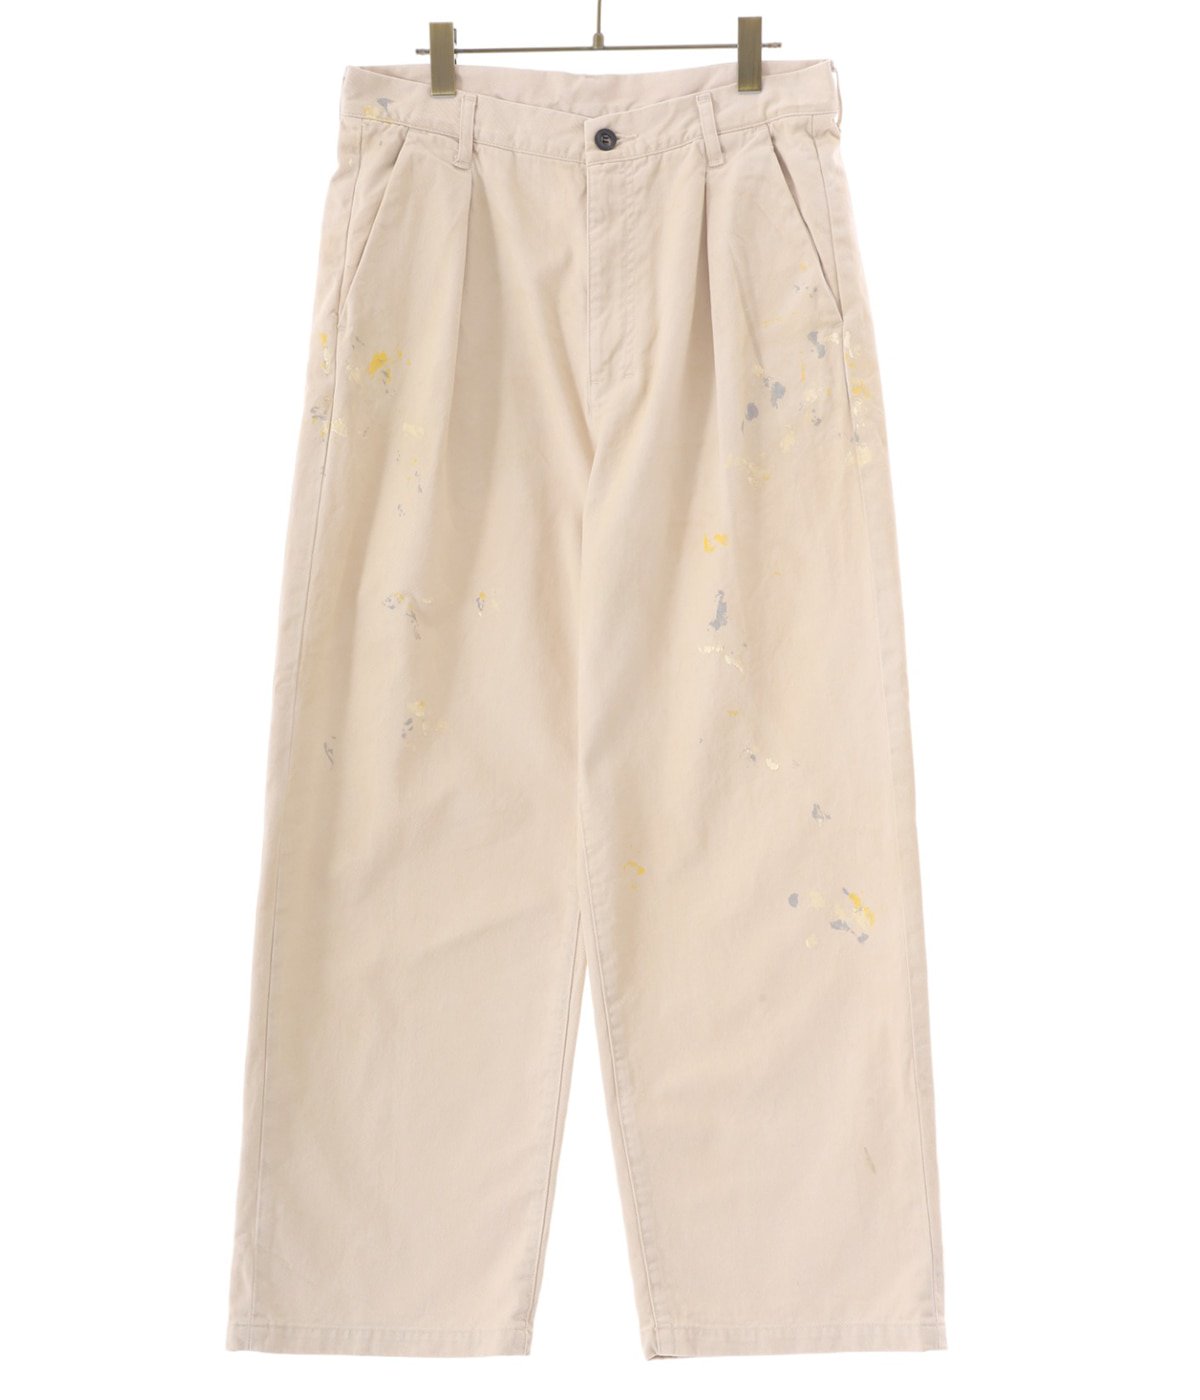 ANCELLM PAINT CHINO TROUSERS アンセルム abitur.gnesin-academy.ru